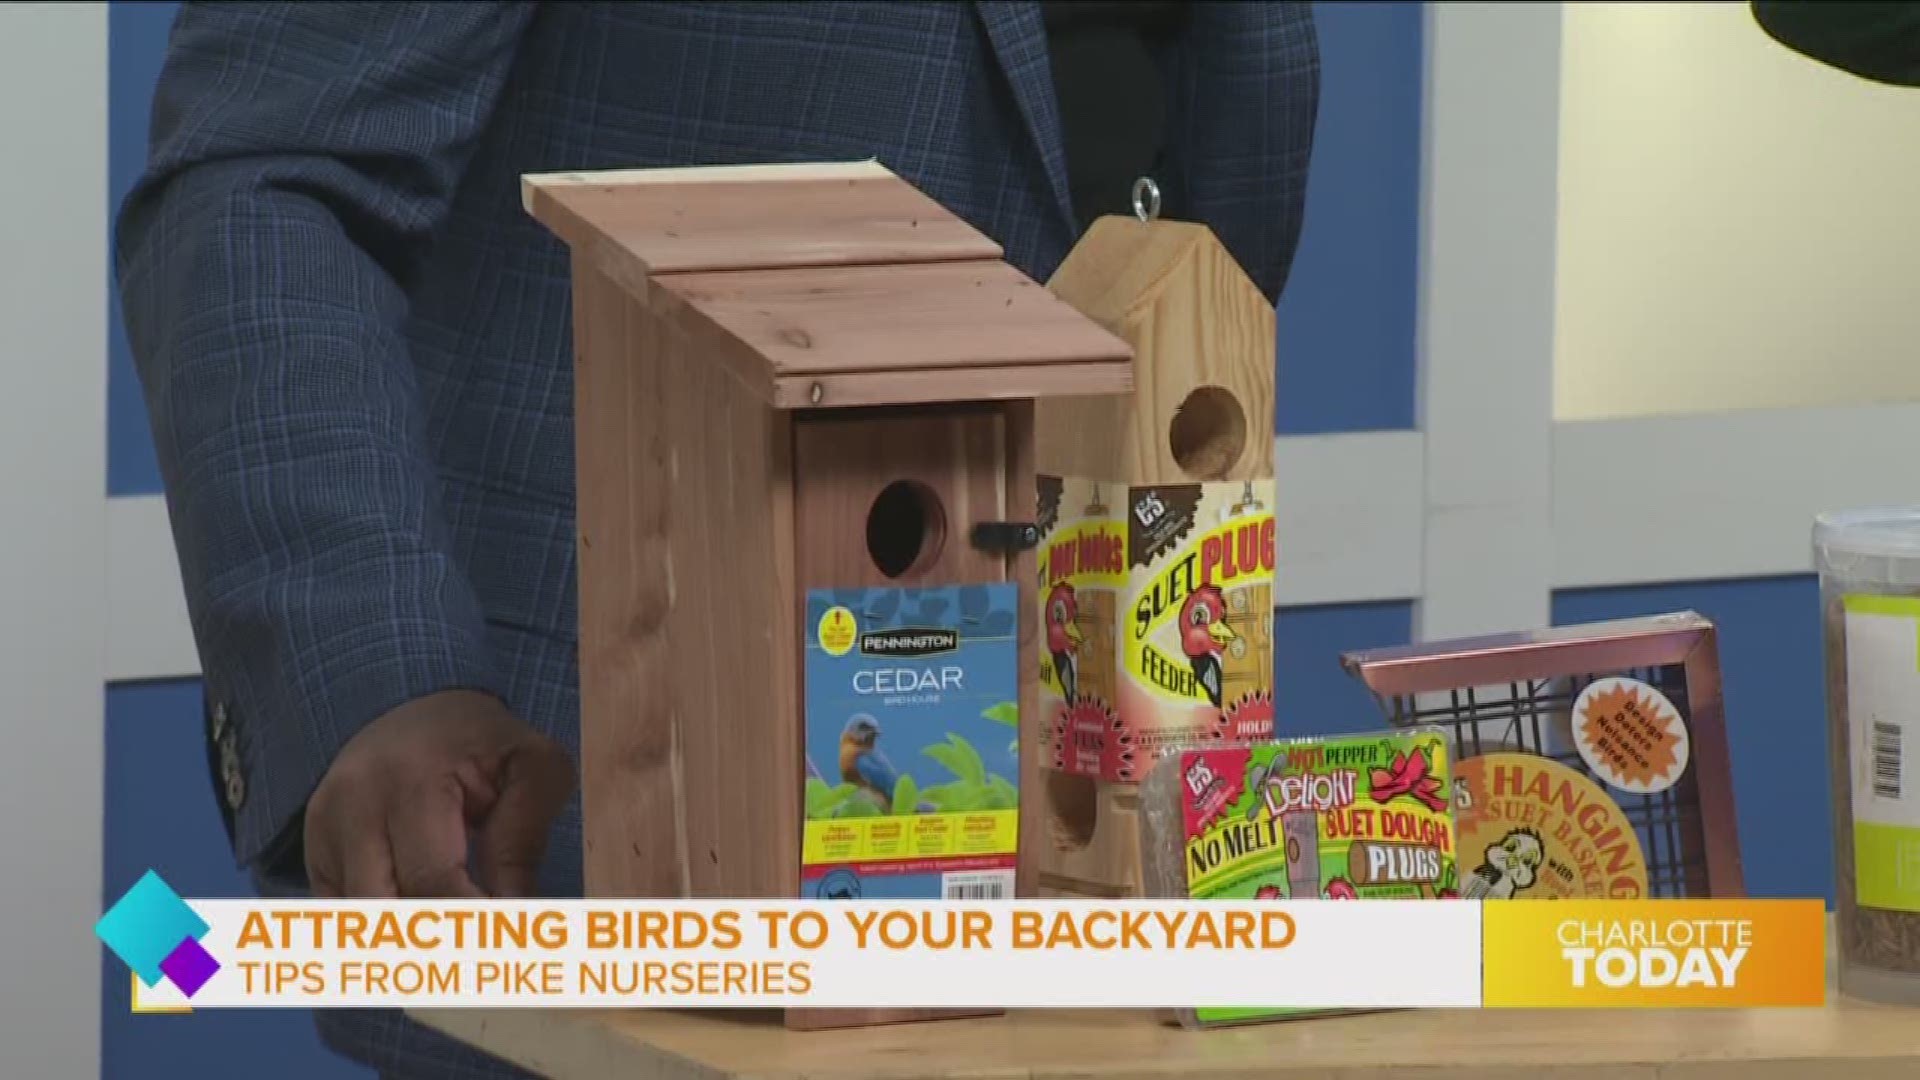 Pike Nursery shares tips on attracting birds to your backyard in the winter time.